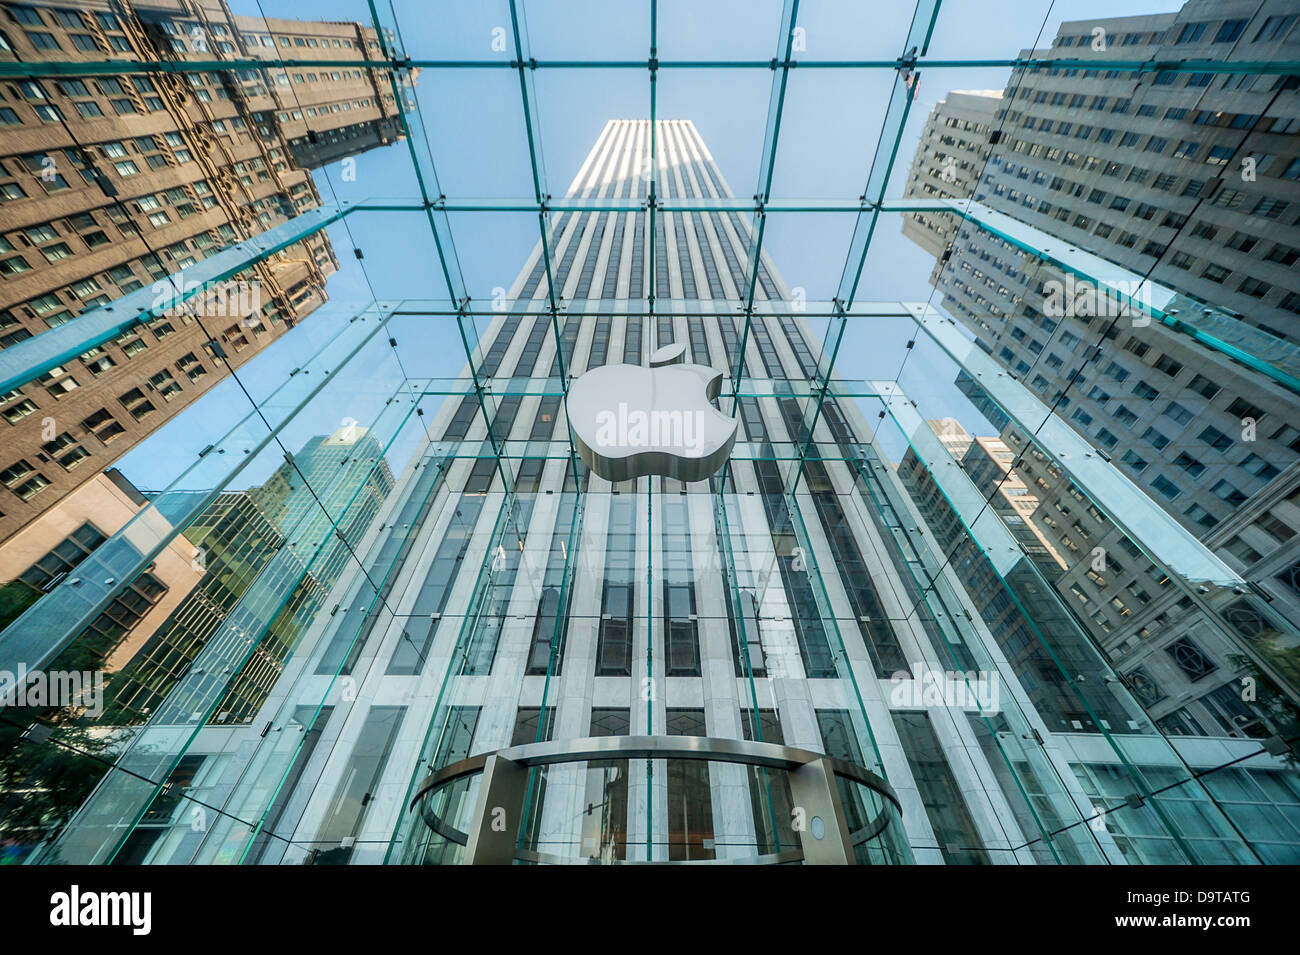 The glass cube over the Apple computer store near Central park in New York City. Stock Photo